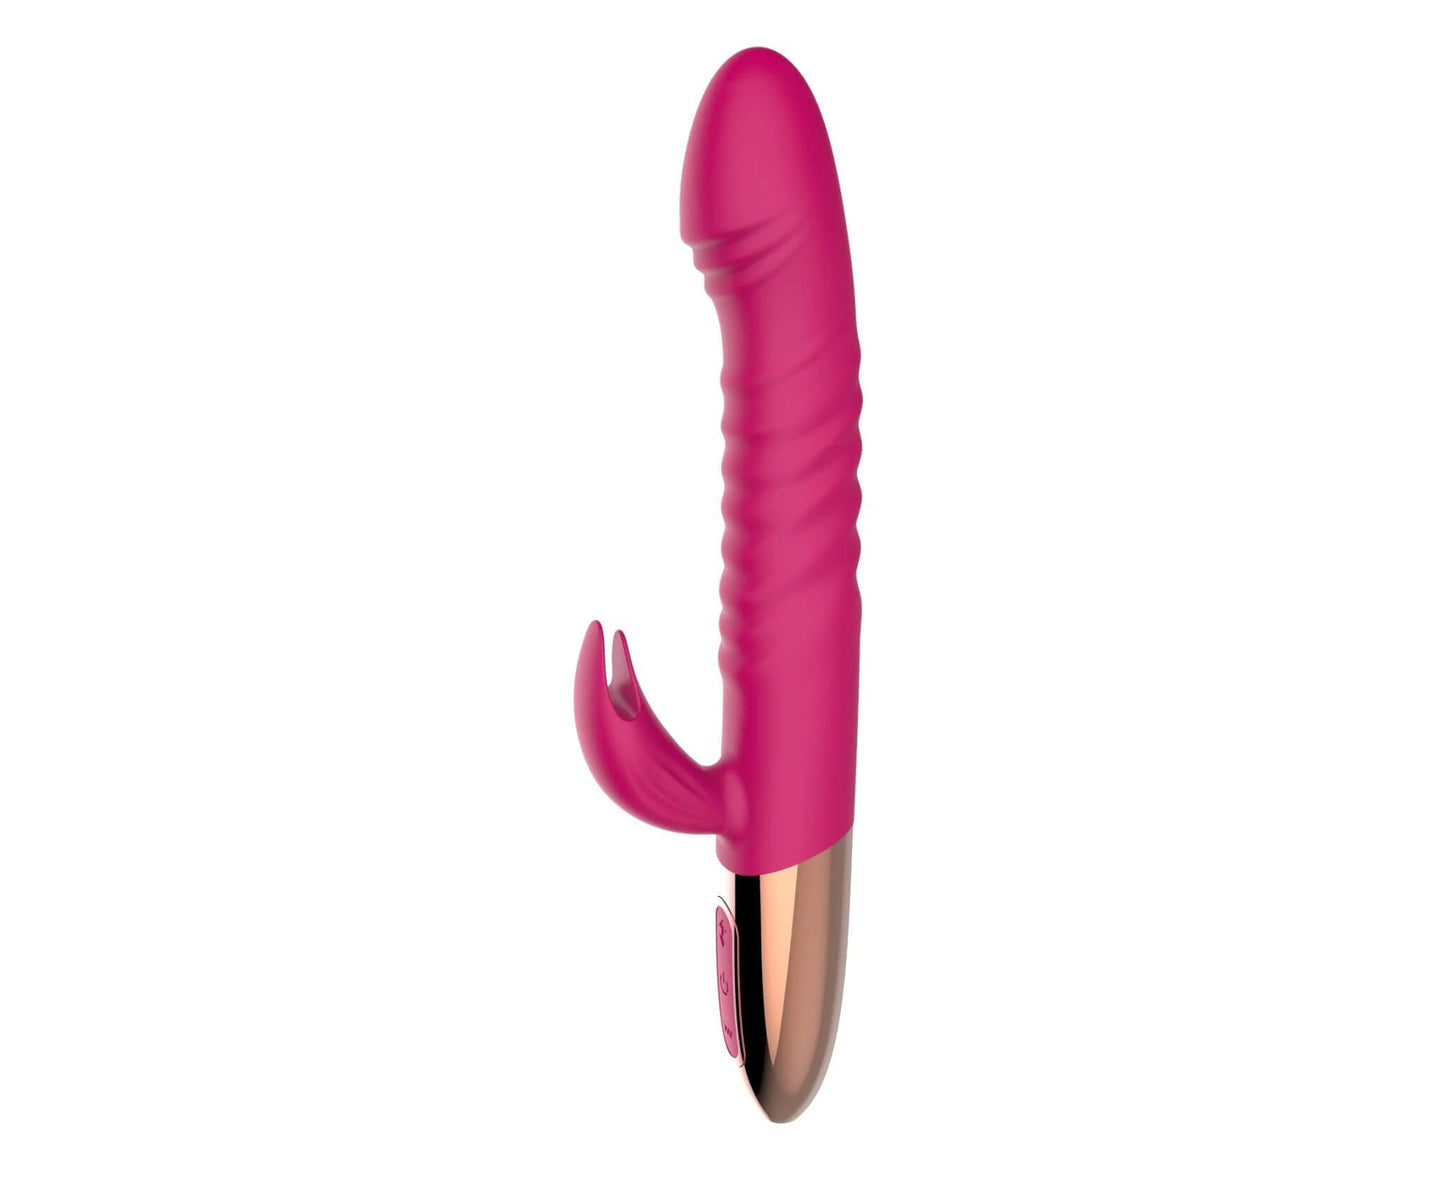 The Pleaser Finesse for unlimted pleasure - The Pleaser Pro